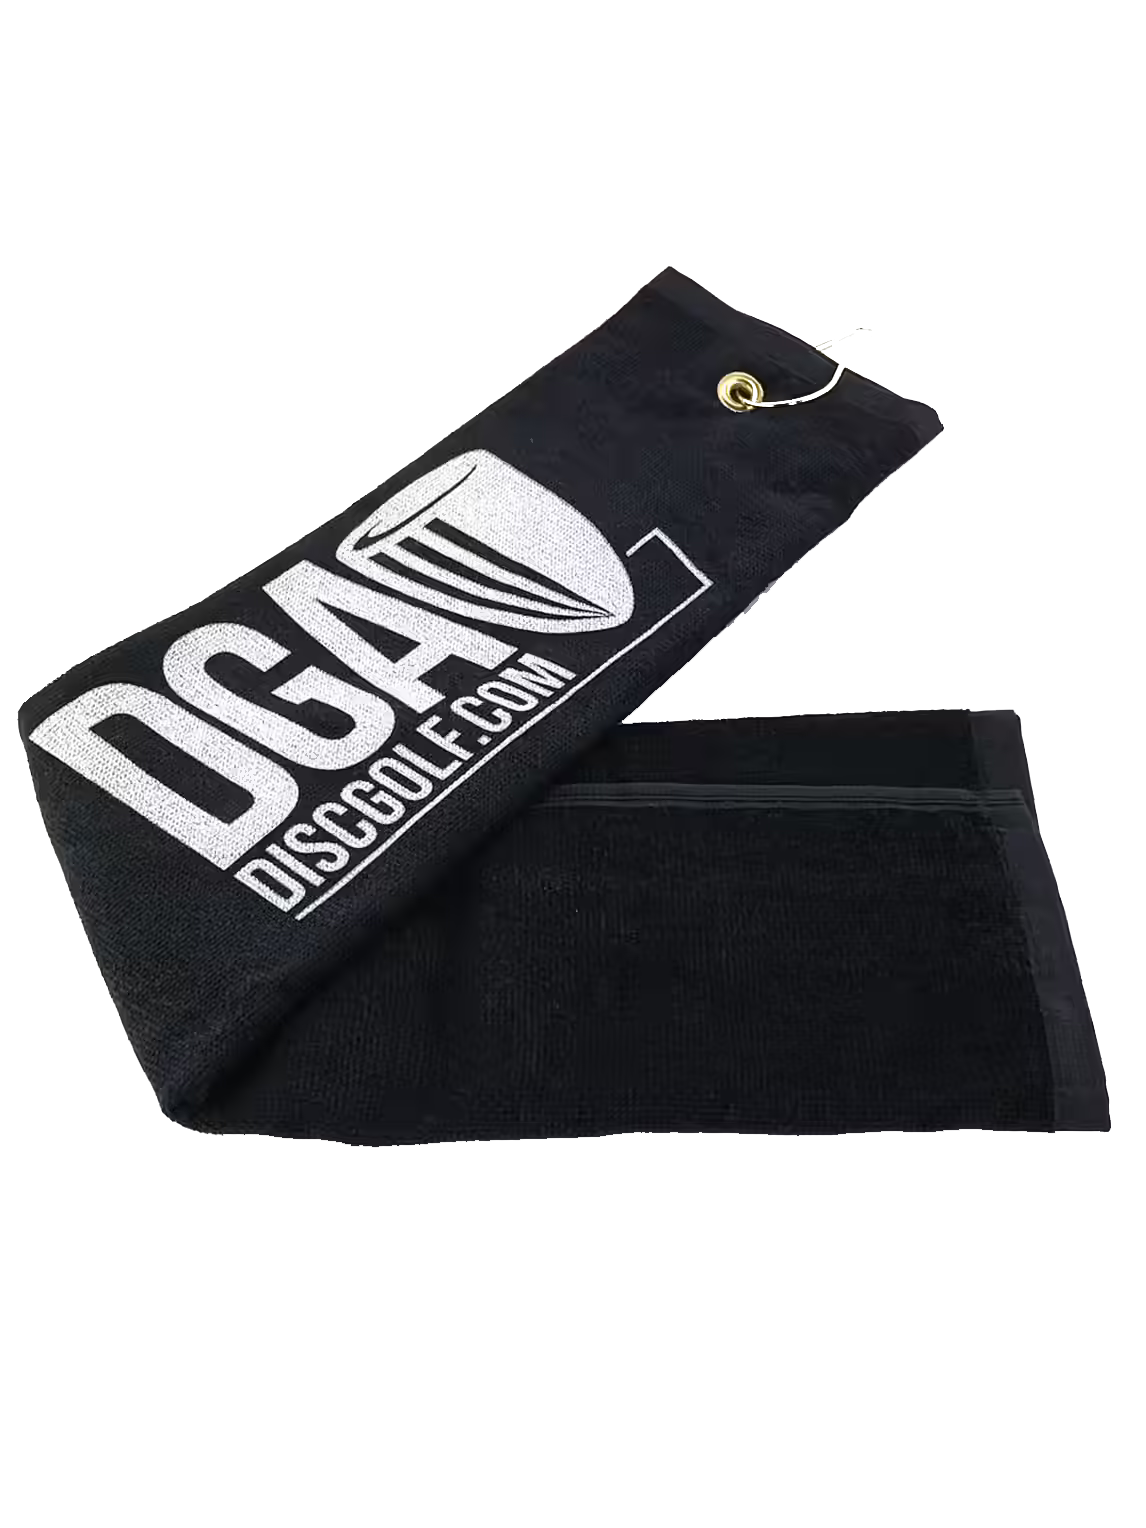 Product Image for TOWEL-DGA